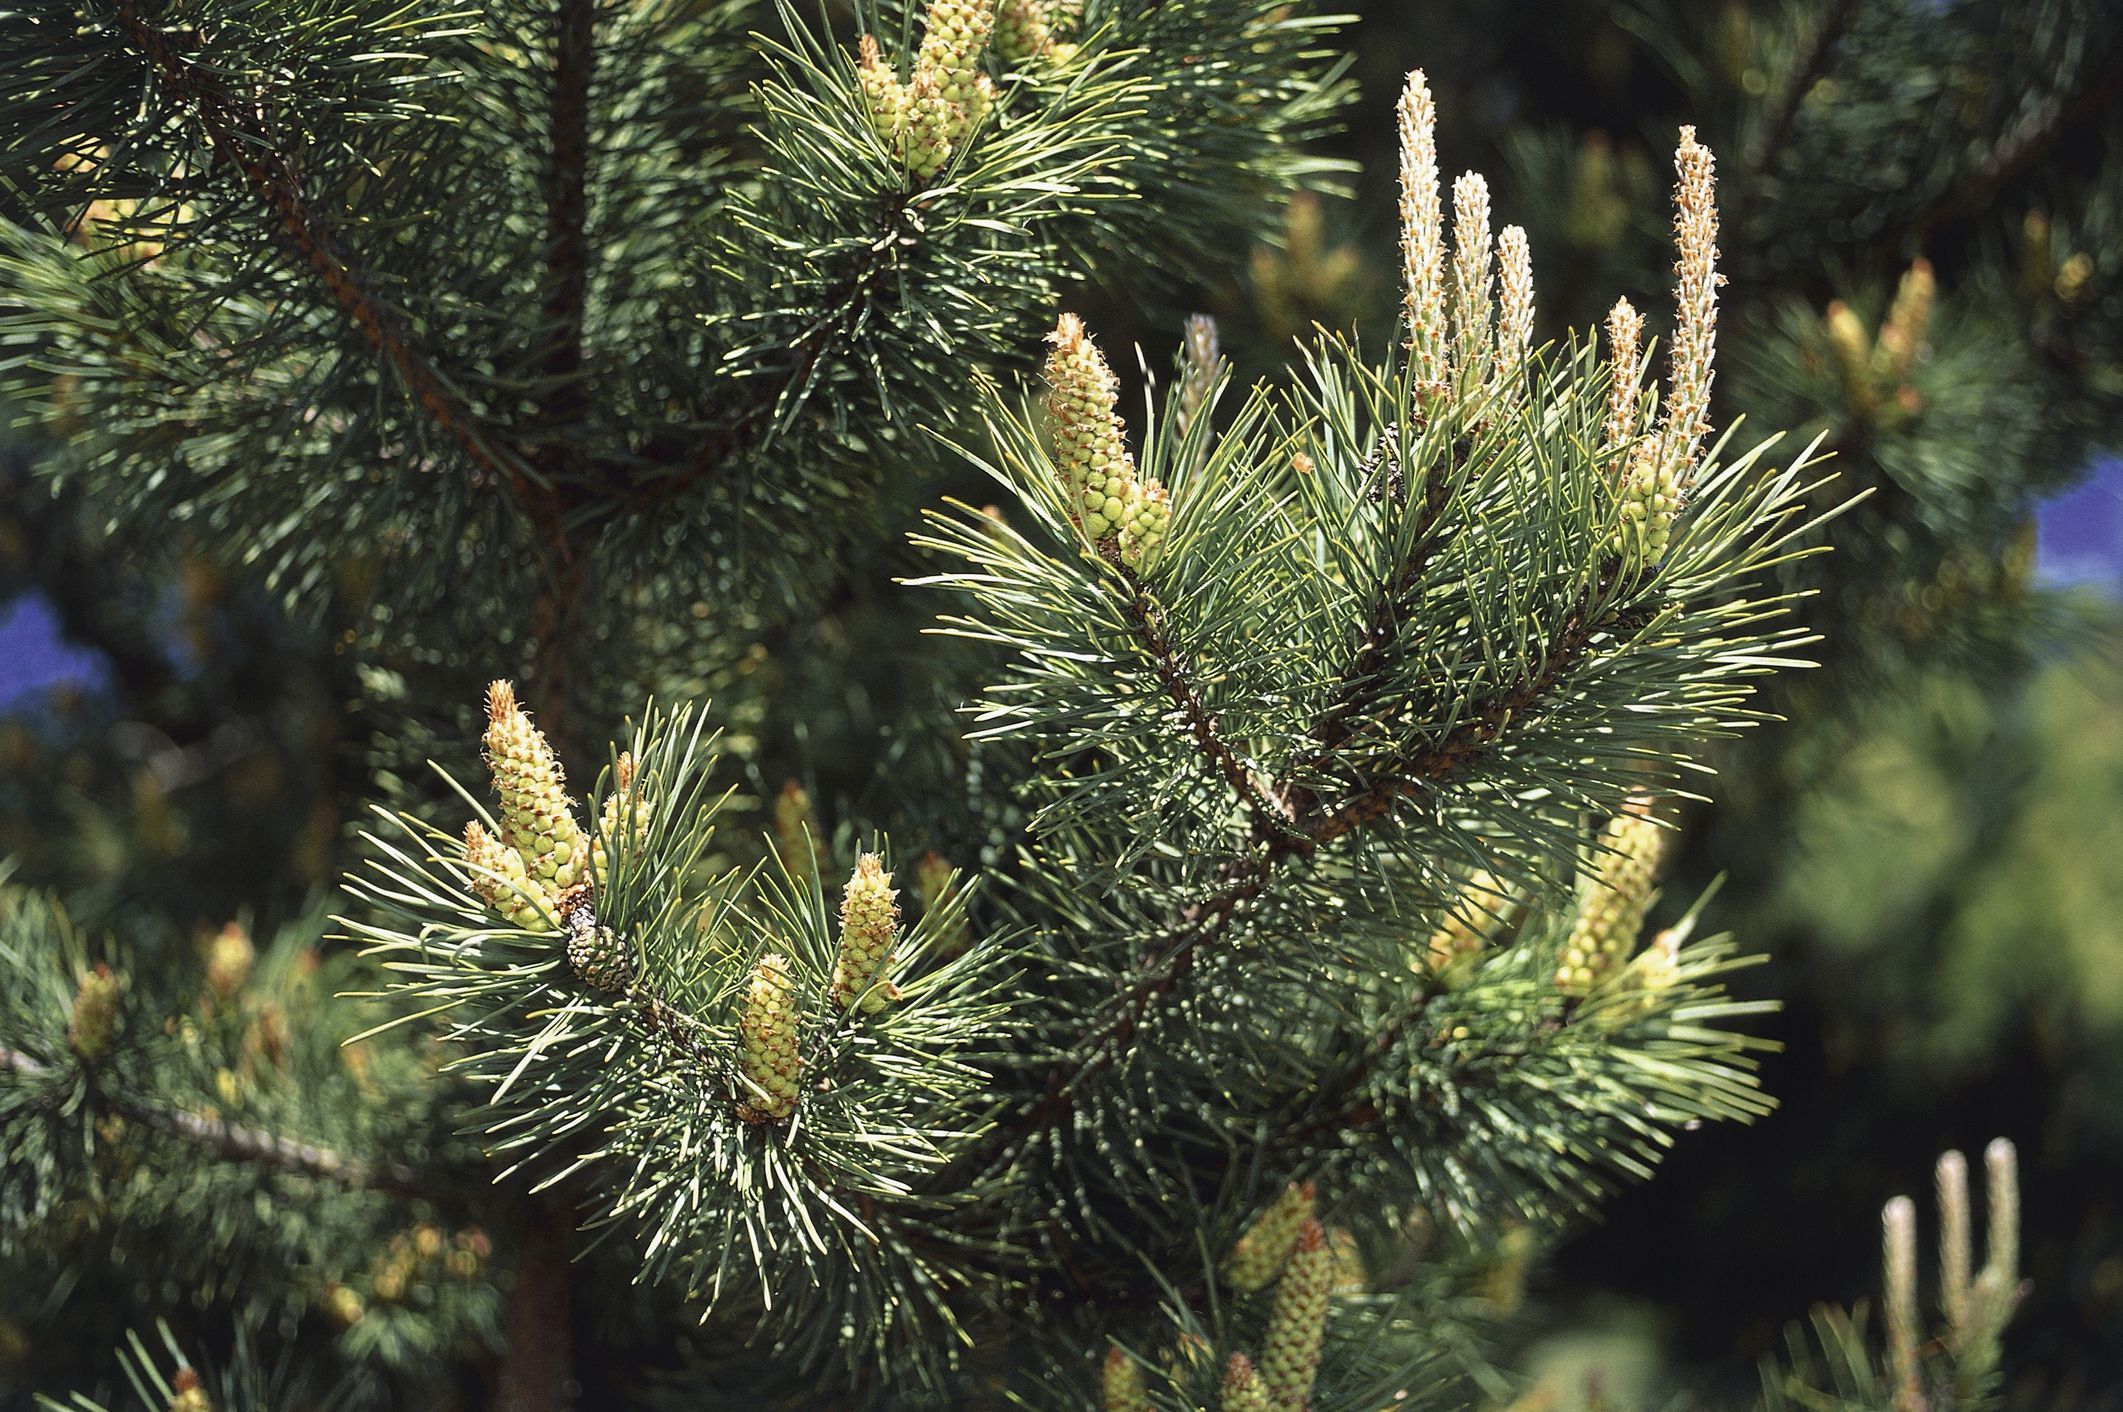 Scotch-Pine-GettyImages-74101246-5980c6a9685fbe00117d5092.jpg